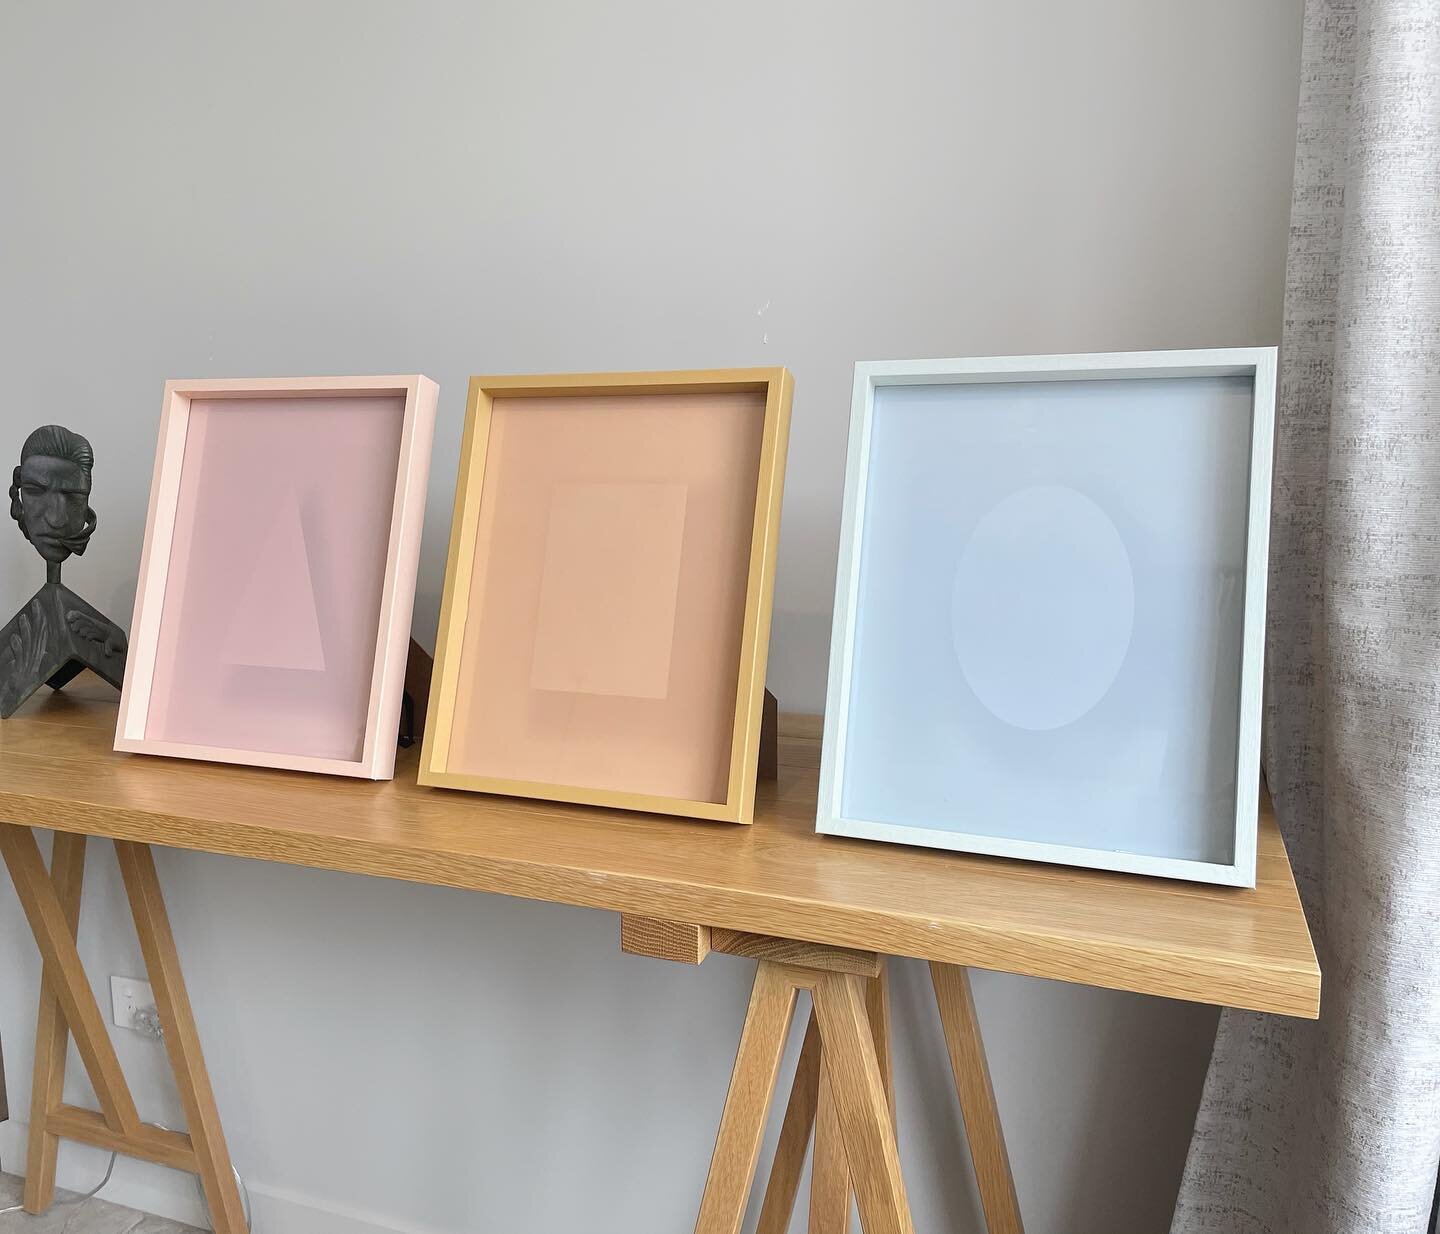 Last weekend we made some DIY nursery art! Easy, quick, cheap and we think pretty adorable 🤍

~ firstly we went to @resenecolour and chose out 3x colours and brought test pots of each
~ we then made made the shapes on our computers, added the shadow